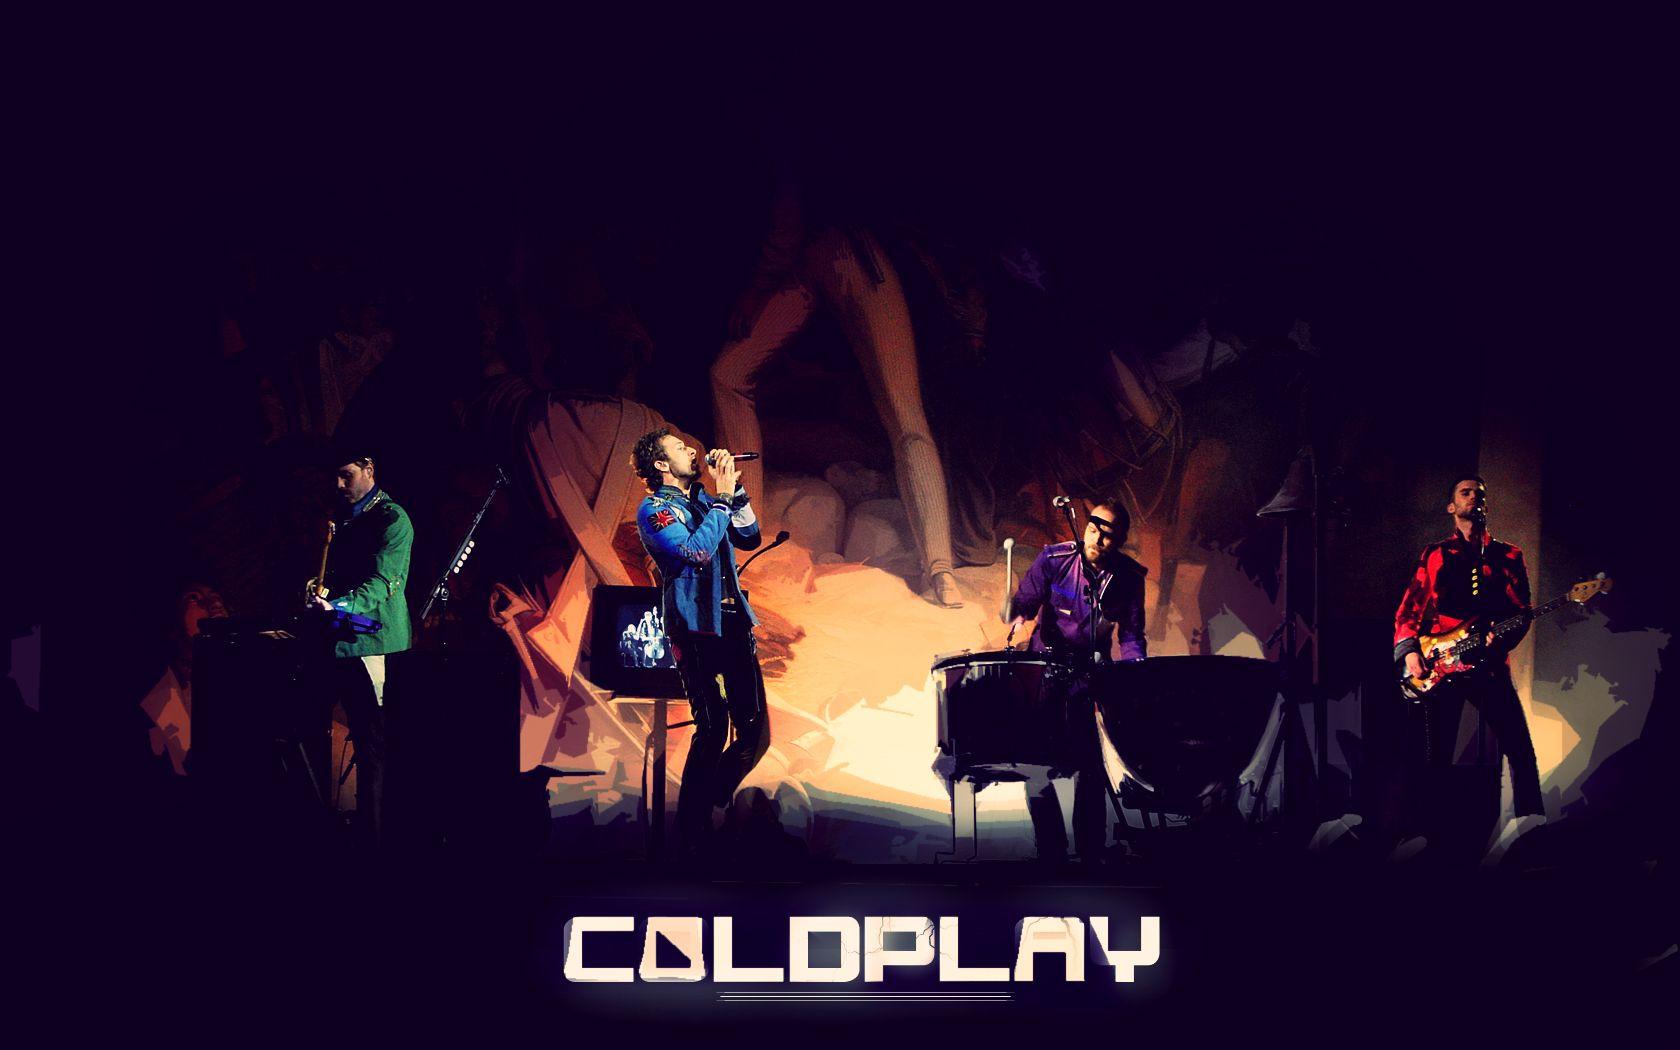 Coldplay Wallpaper, PC, Lap Coldplay Background In FHD CJN19